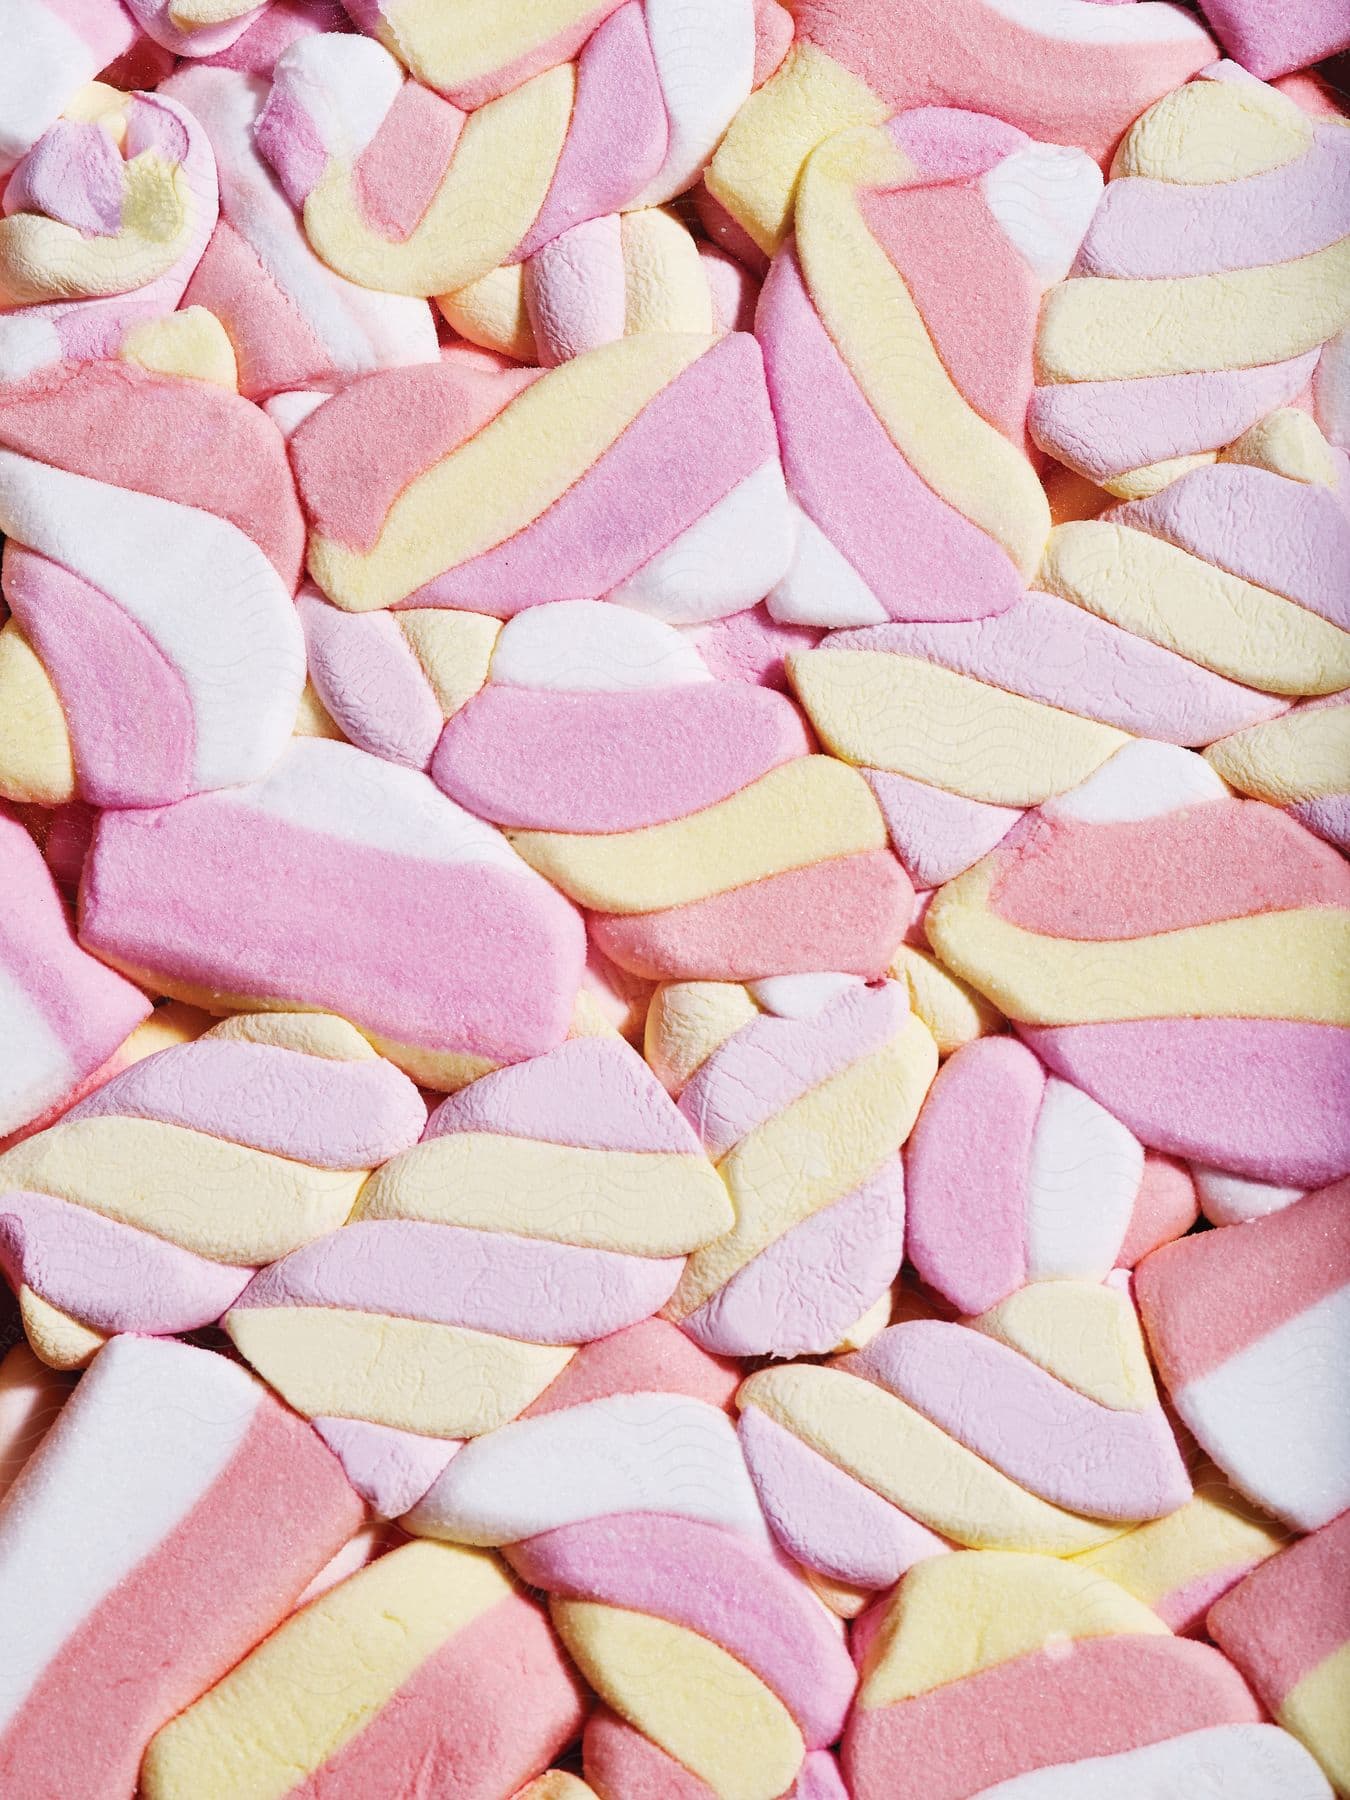 Multicolored marshmallow candy is smooshed together